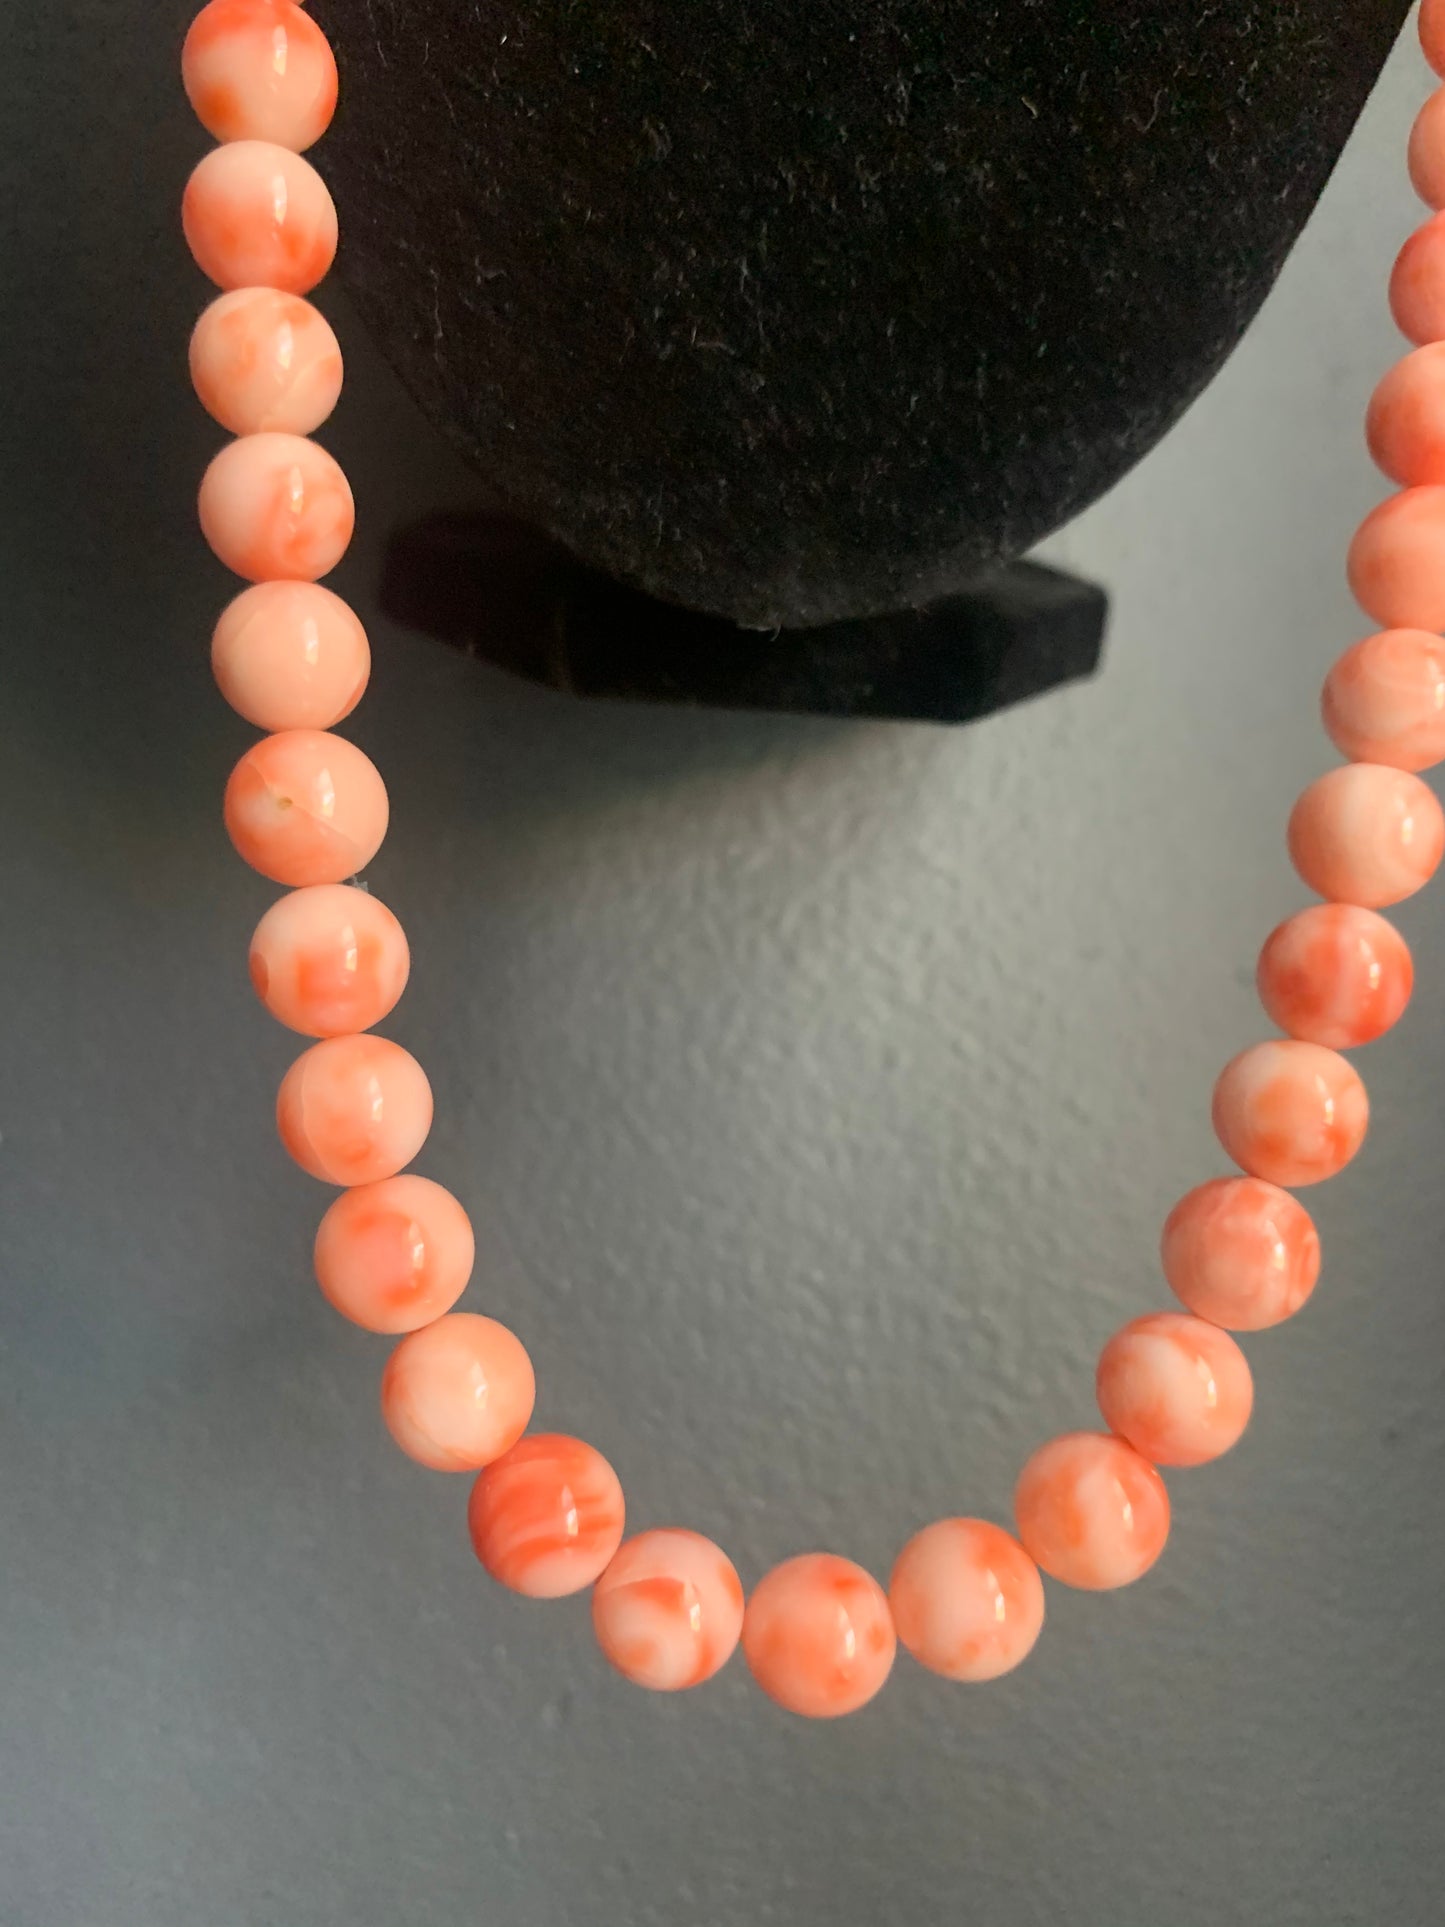 A salmon colored coral -like bead necklace